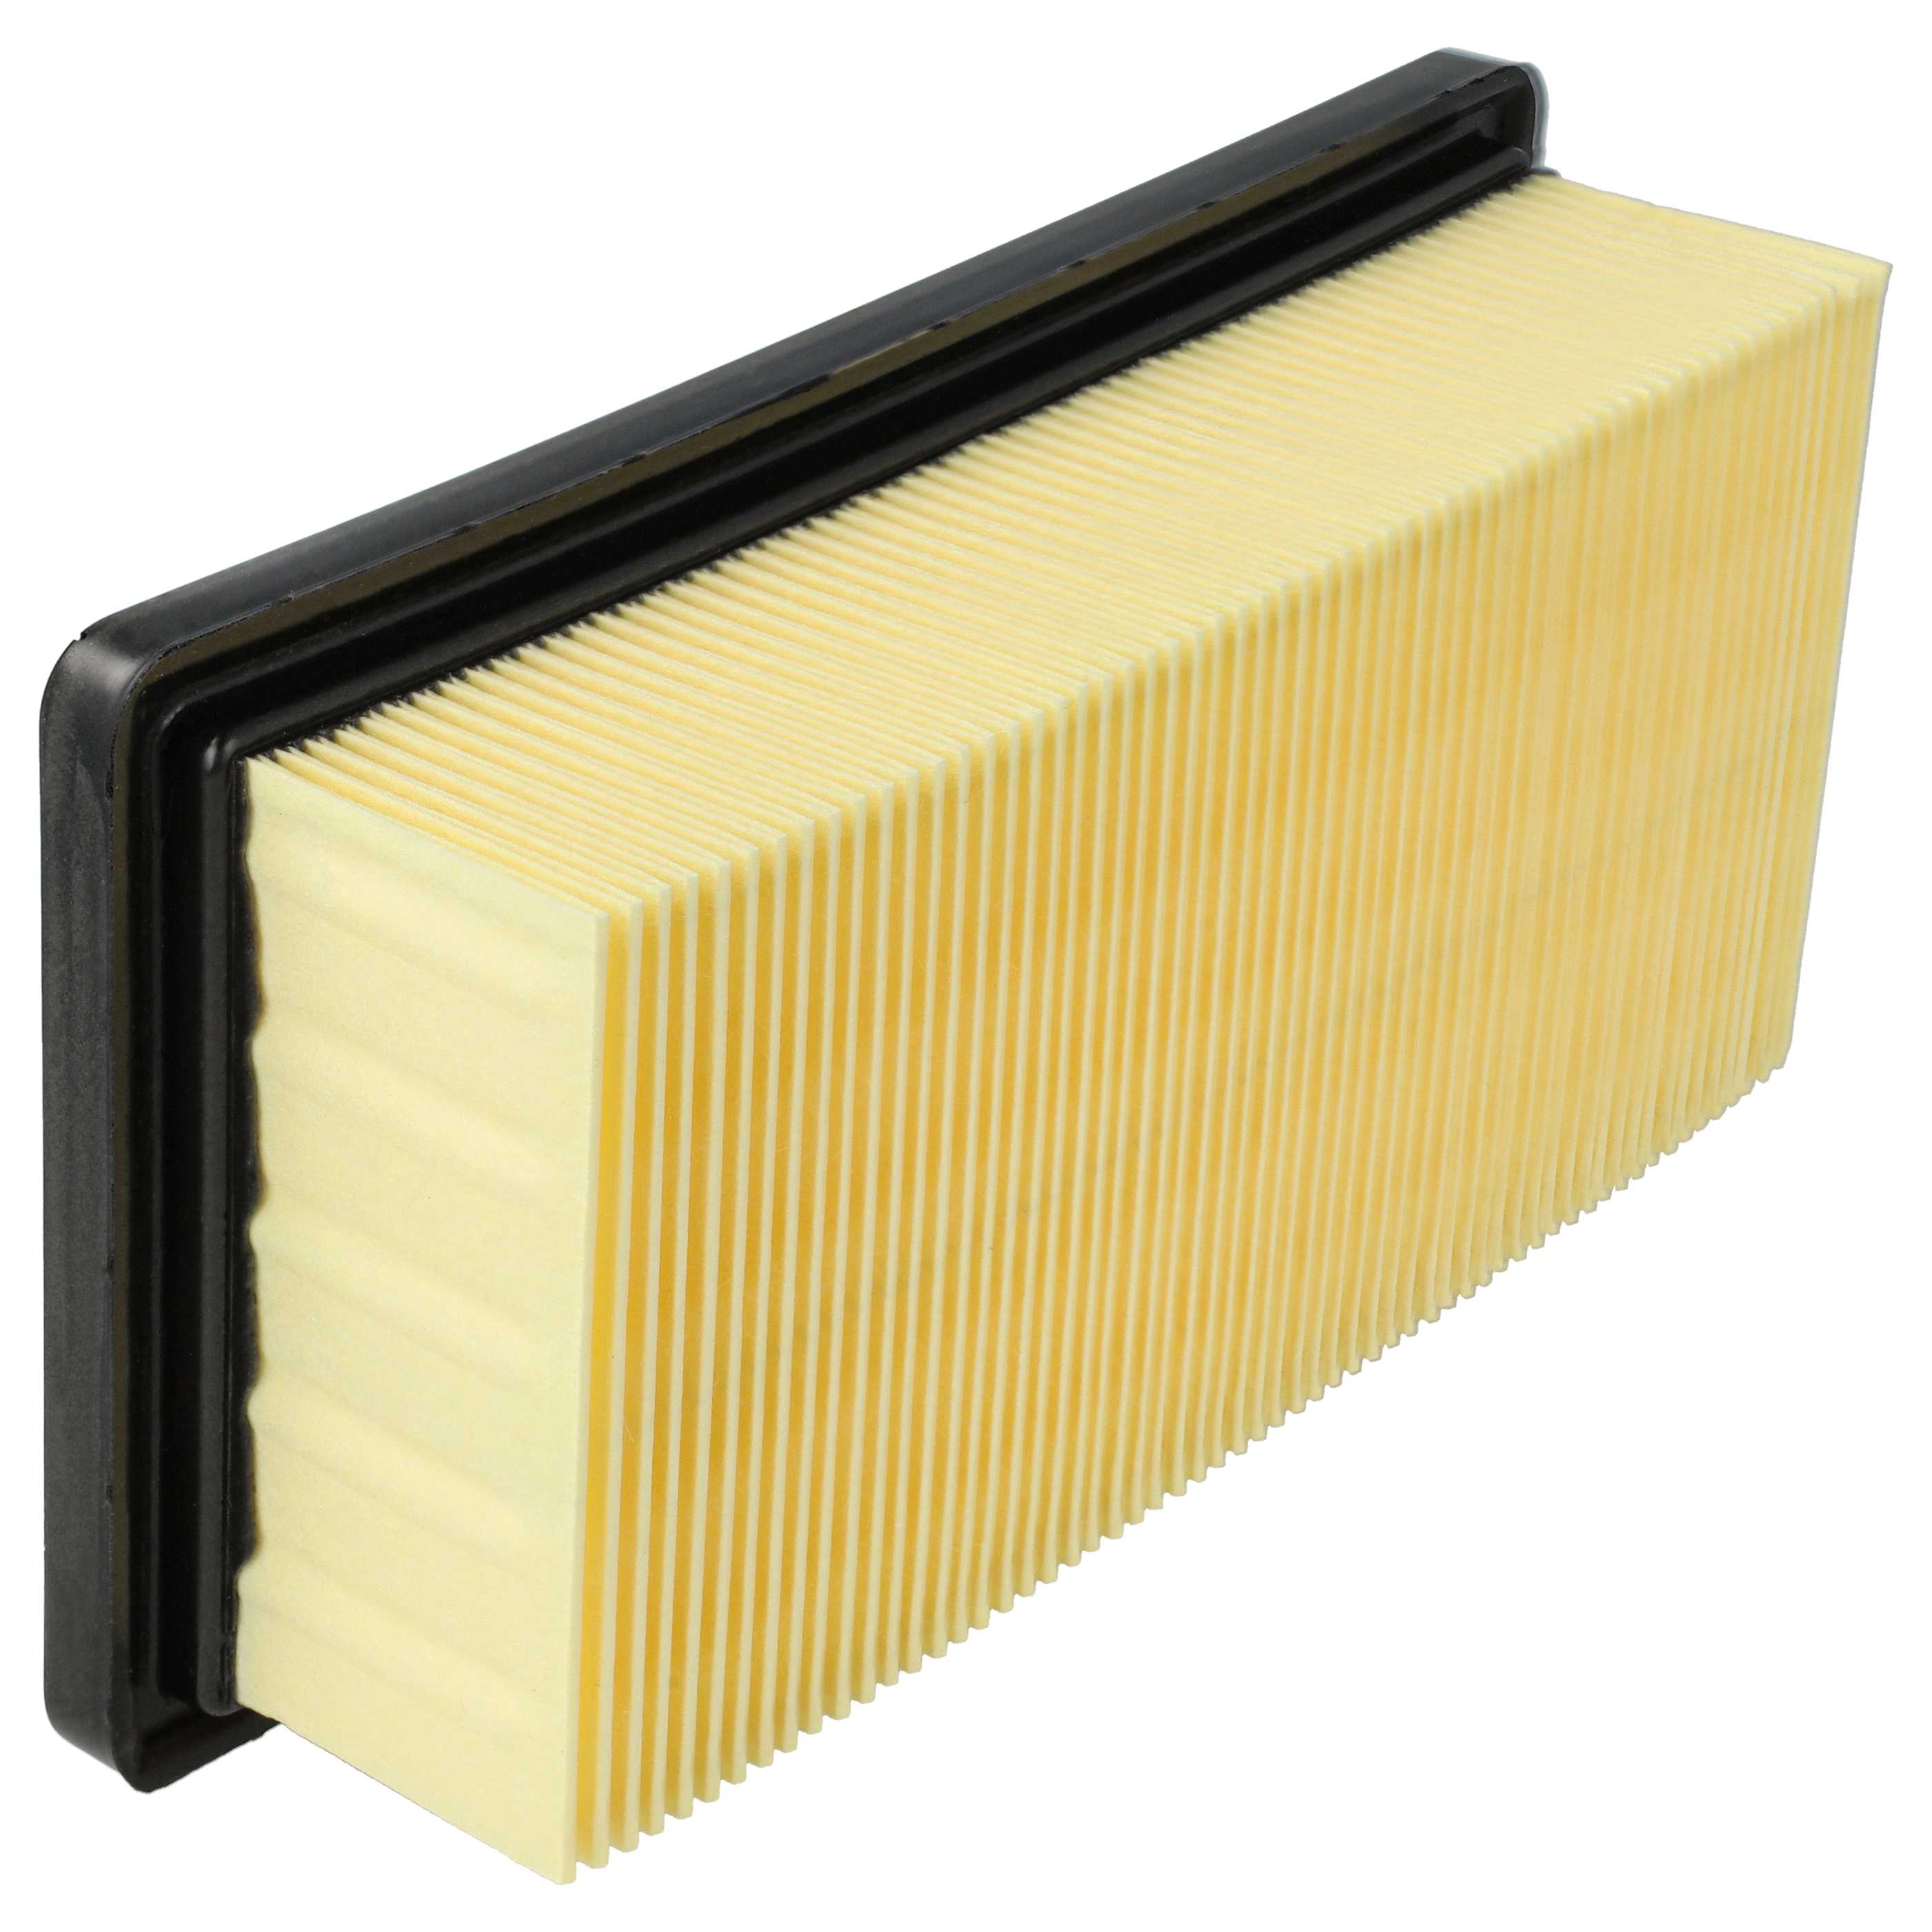 2x flat pleated filter replaces Kärcher 6.414-971.0 for KärcherVacuum Cleaner